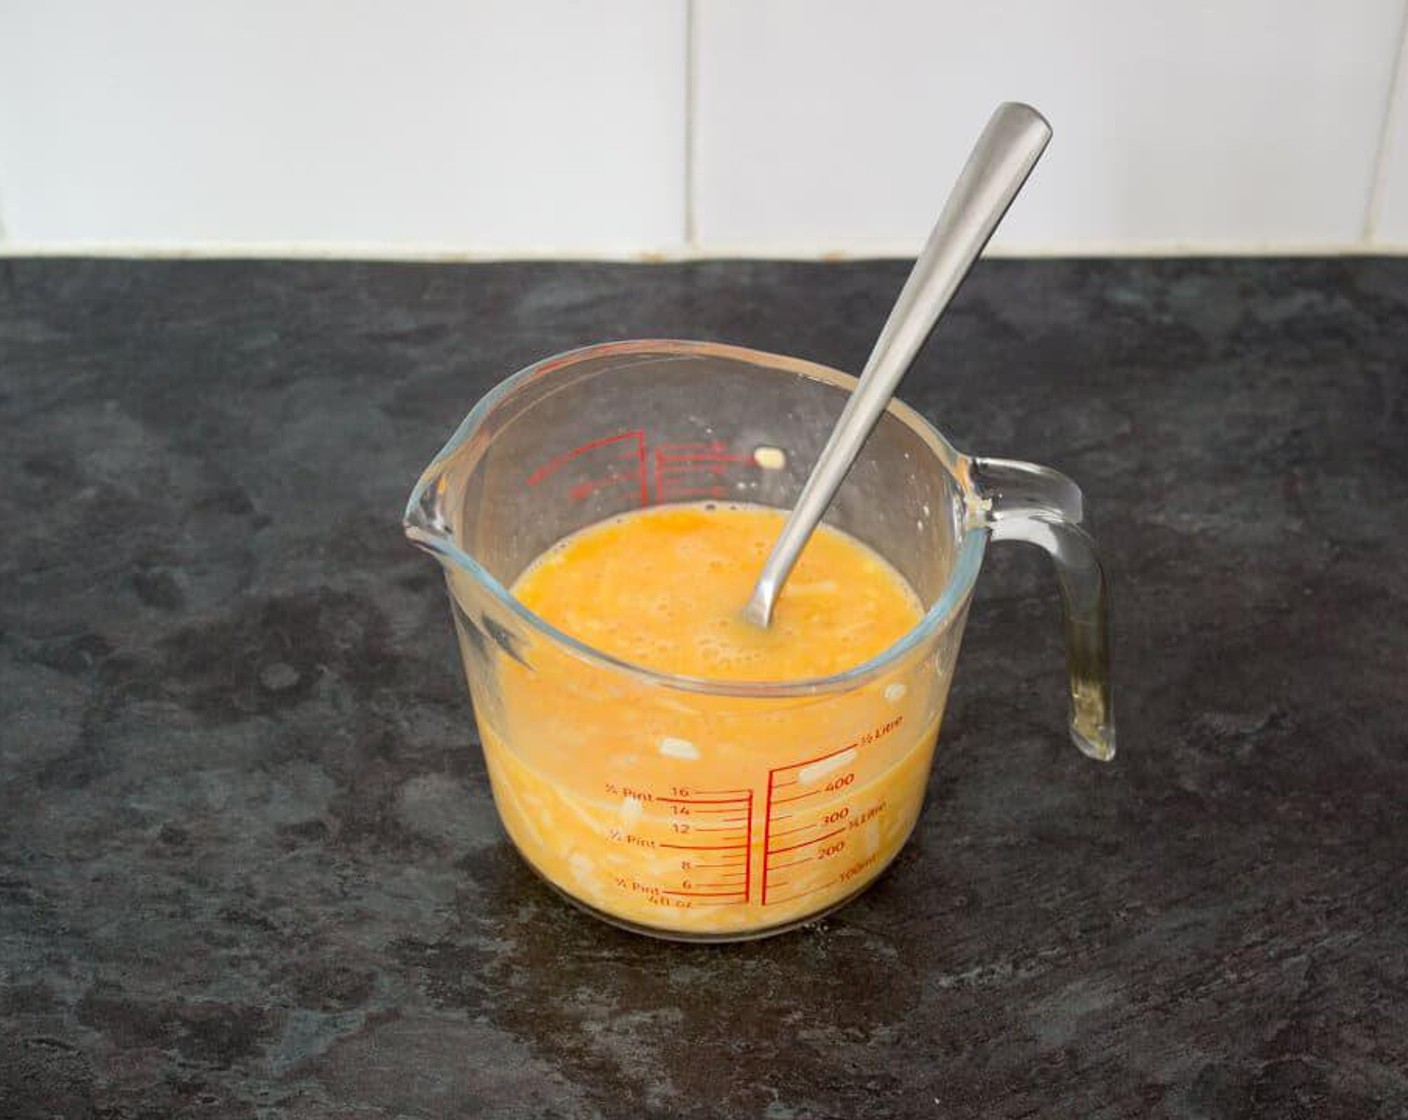 step 1 In a jug or bowl, beat together the Eggs (4), Mature Cheddar Cheese (1/2 cup), Milk (1 splash), and a generous pinch of Salt (to taste) with a fork until blended.